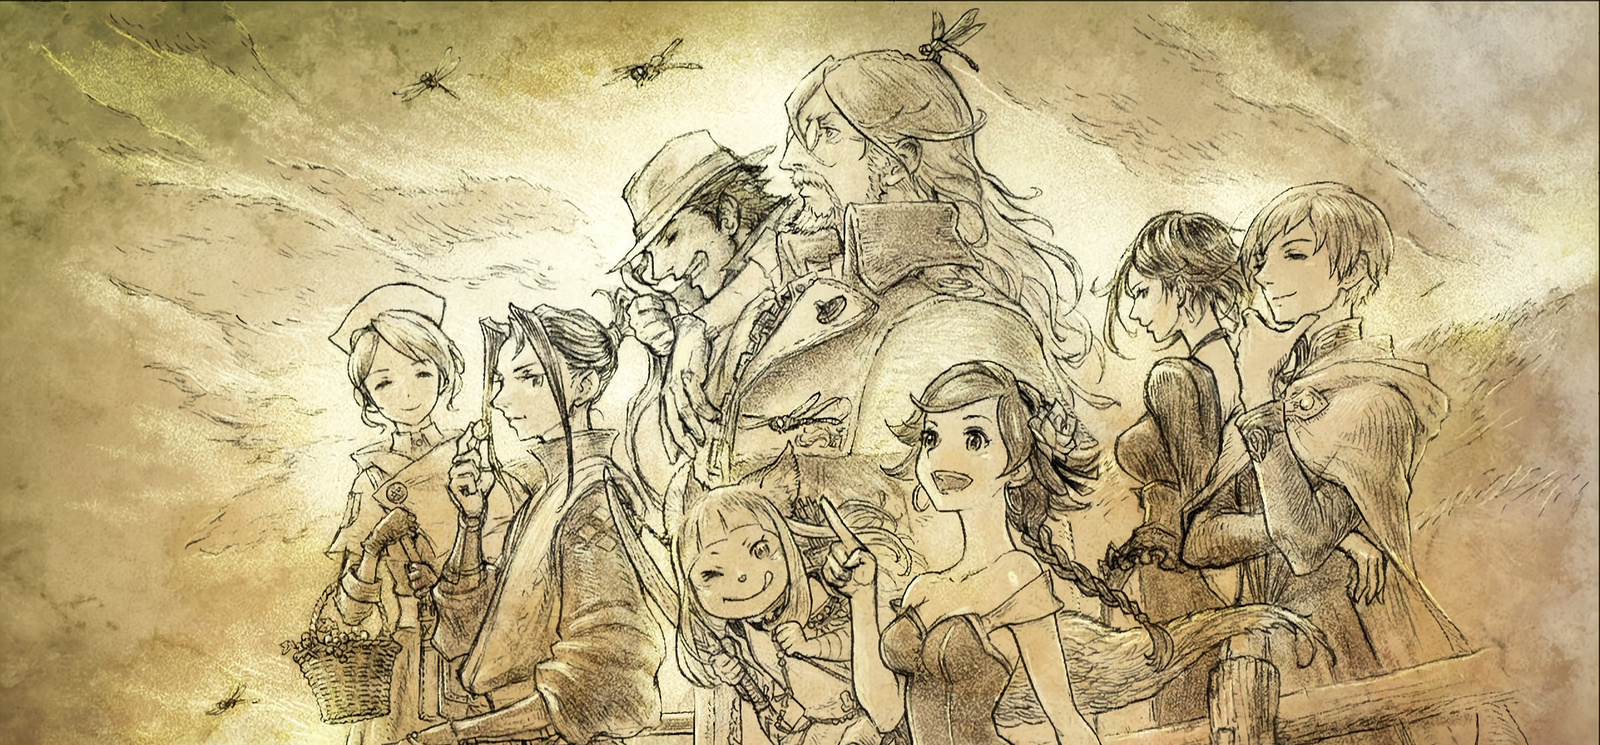 OCTOPATH TRAVELER 2 for PlayStation, Nintendo Switch and Steam